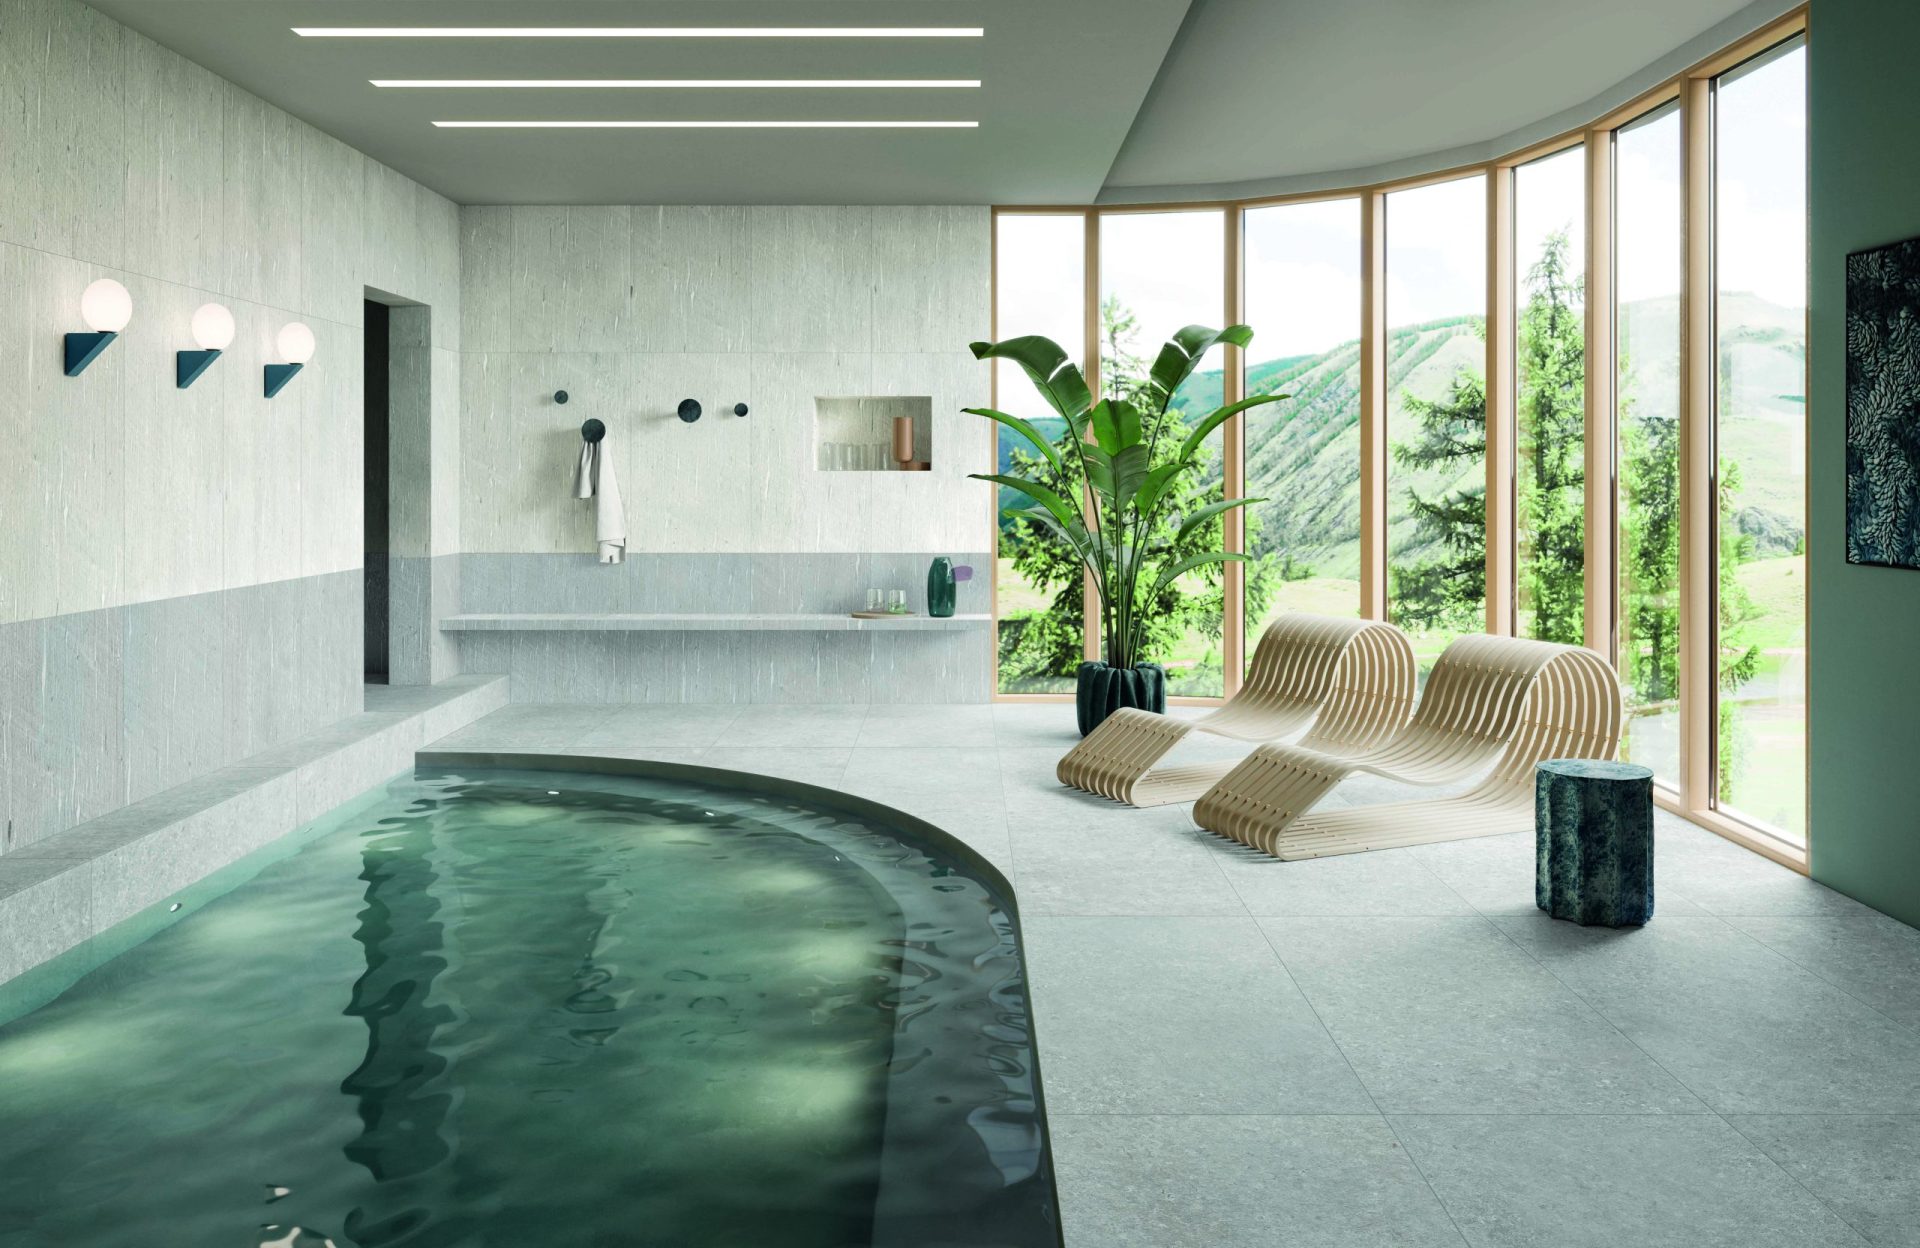 Spa and dunking pool showing Tide Road porcelain tile in Platinum Cross cut on the floor and Light Vein cut on the walls.